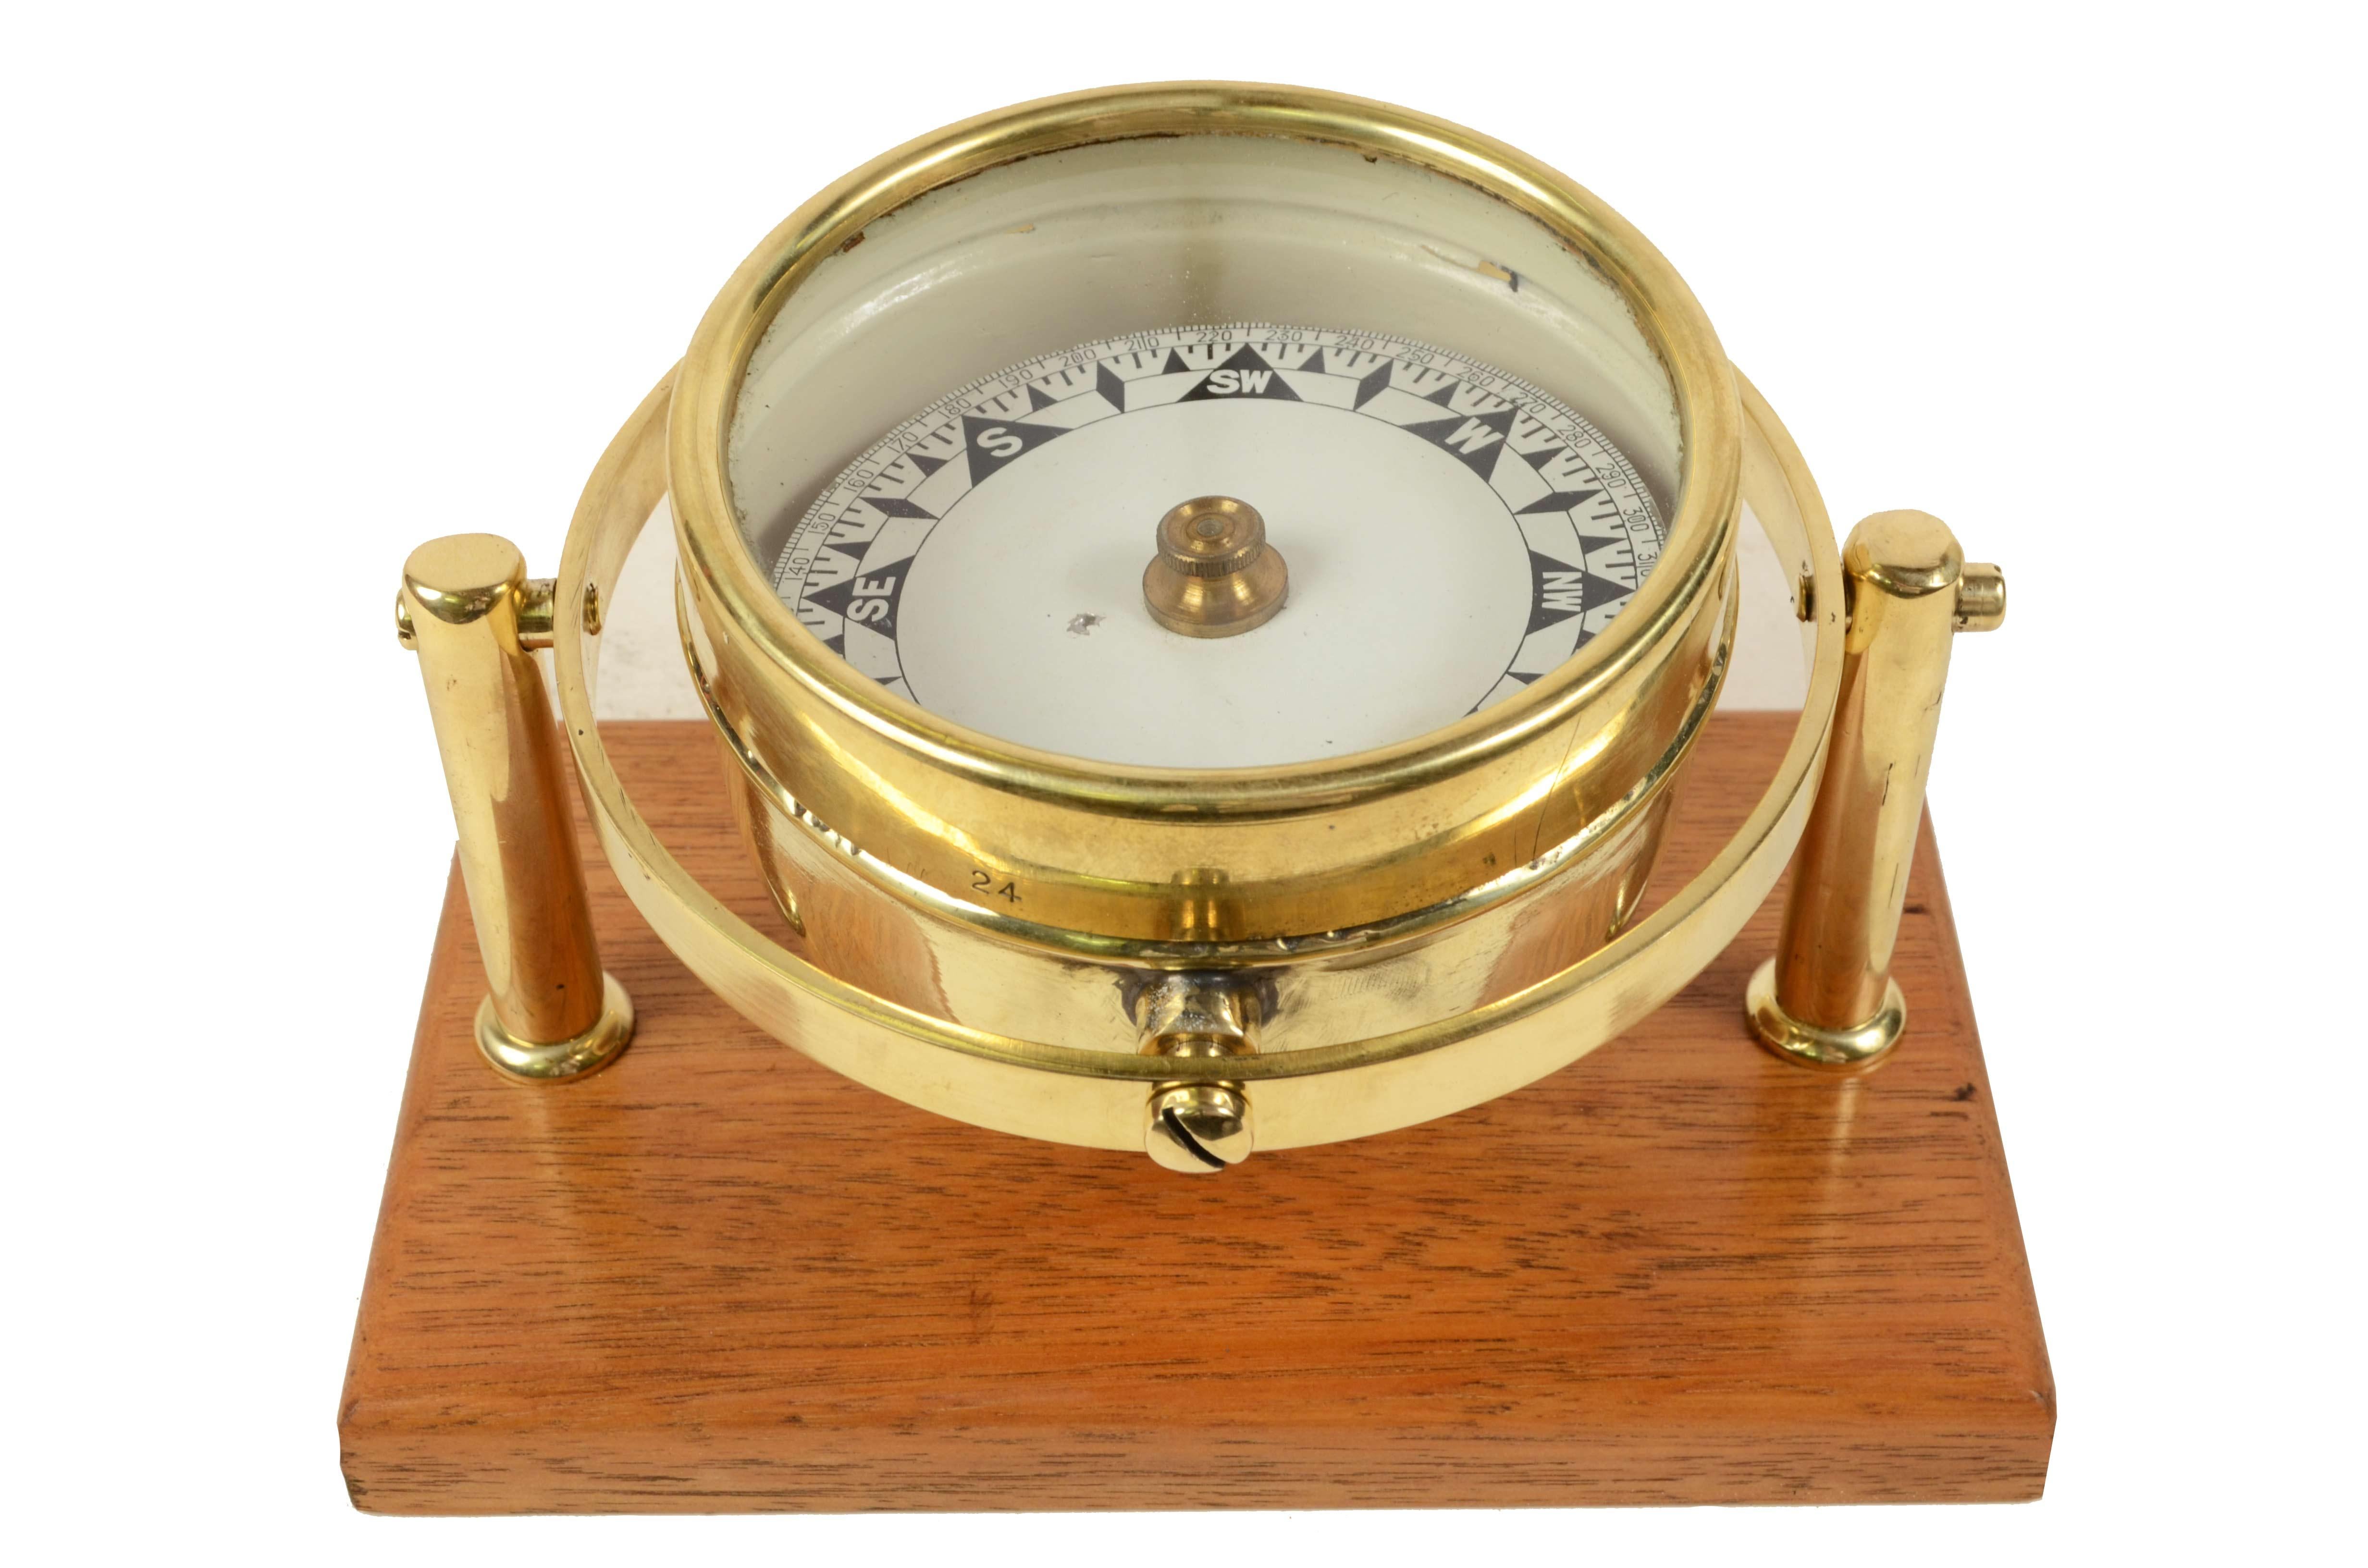 Early 20th Century 1900s Brass Magnetic Compass Signed Sestrel Antique Maritime Navigation Tool